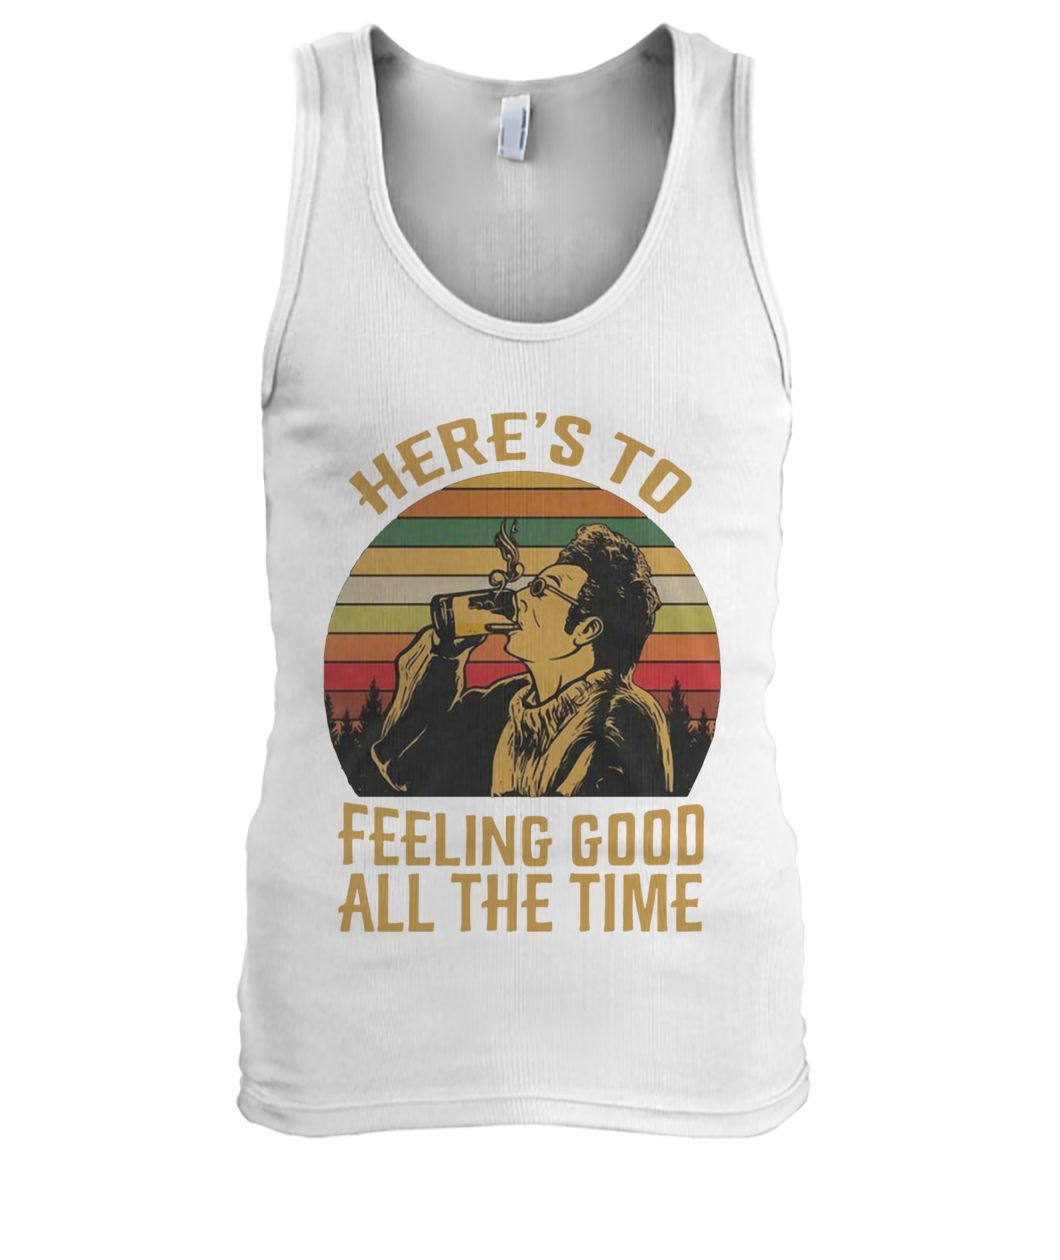 Vintage krame here's to feeling good all the time seinfeld men's tank top